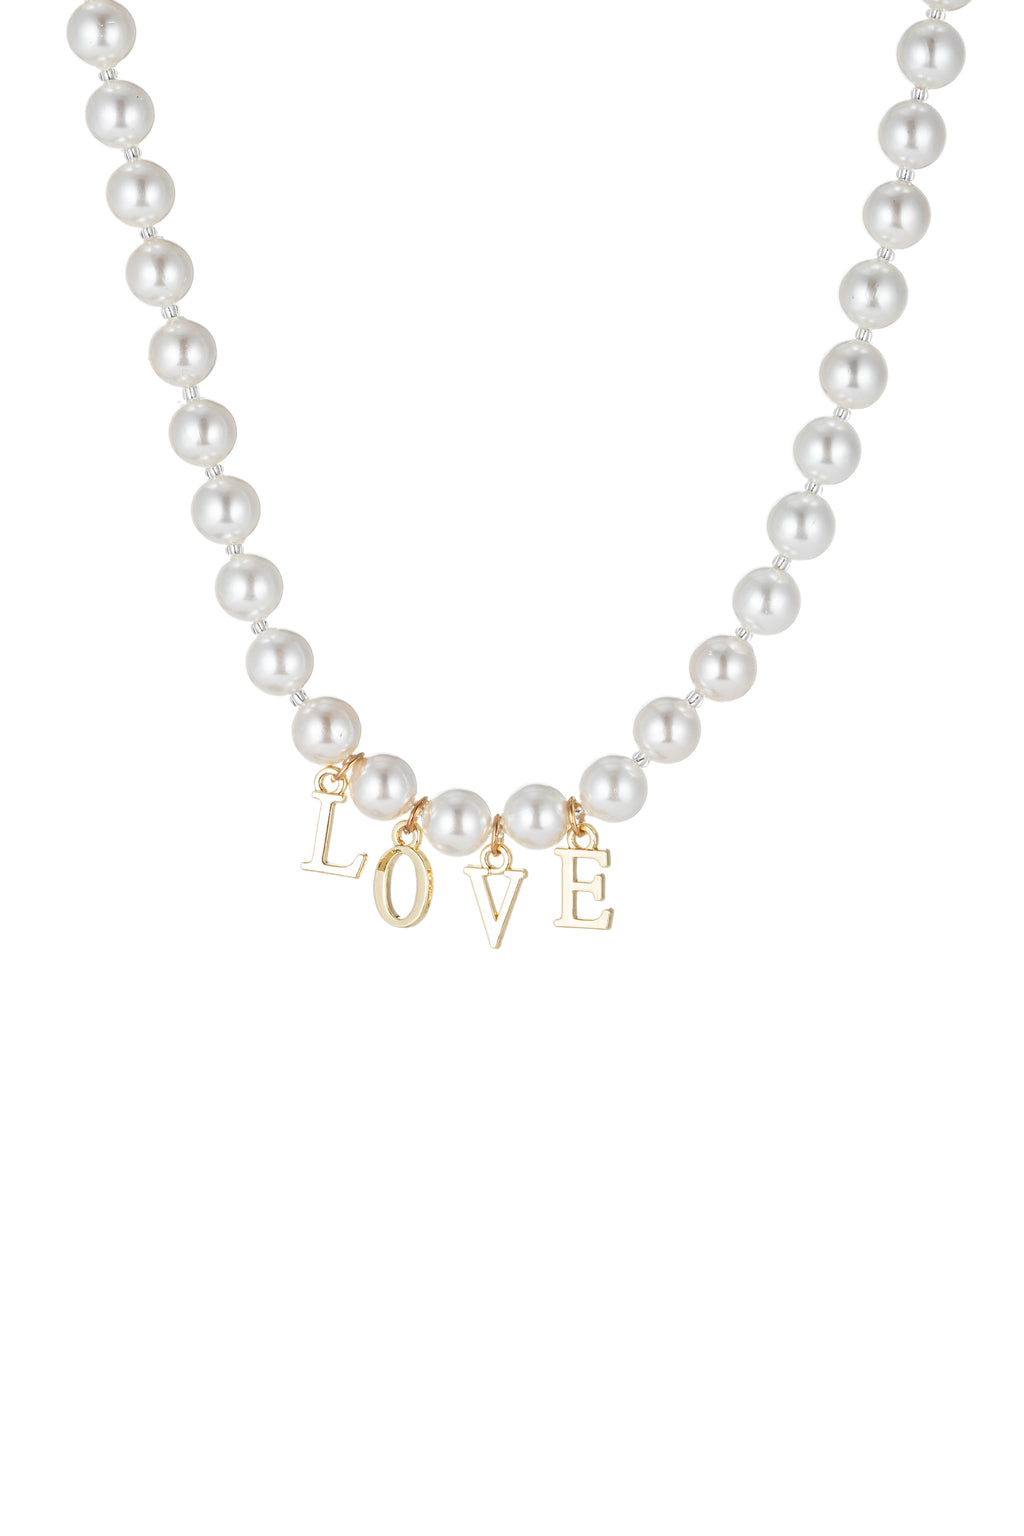 Shell pearl necklace with pendant that says "LOVE". 